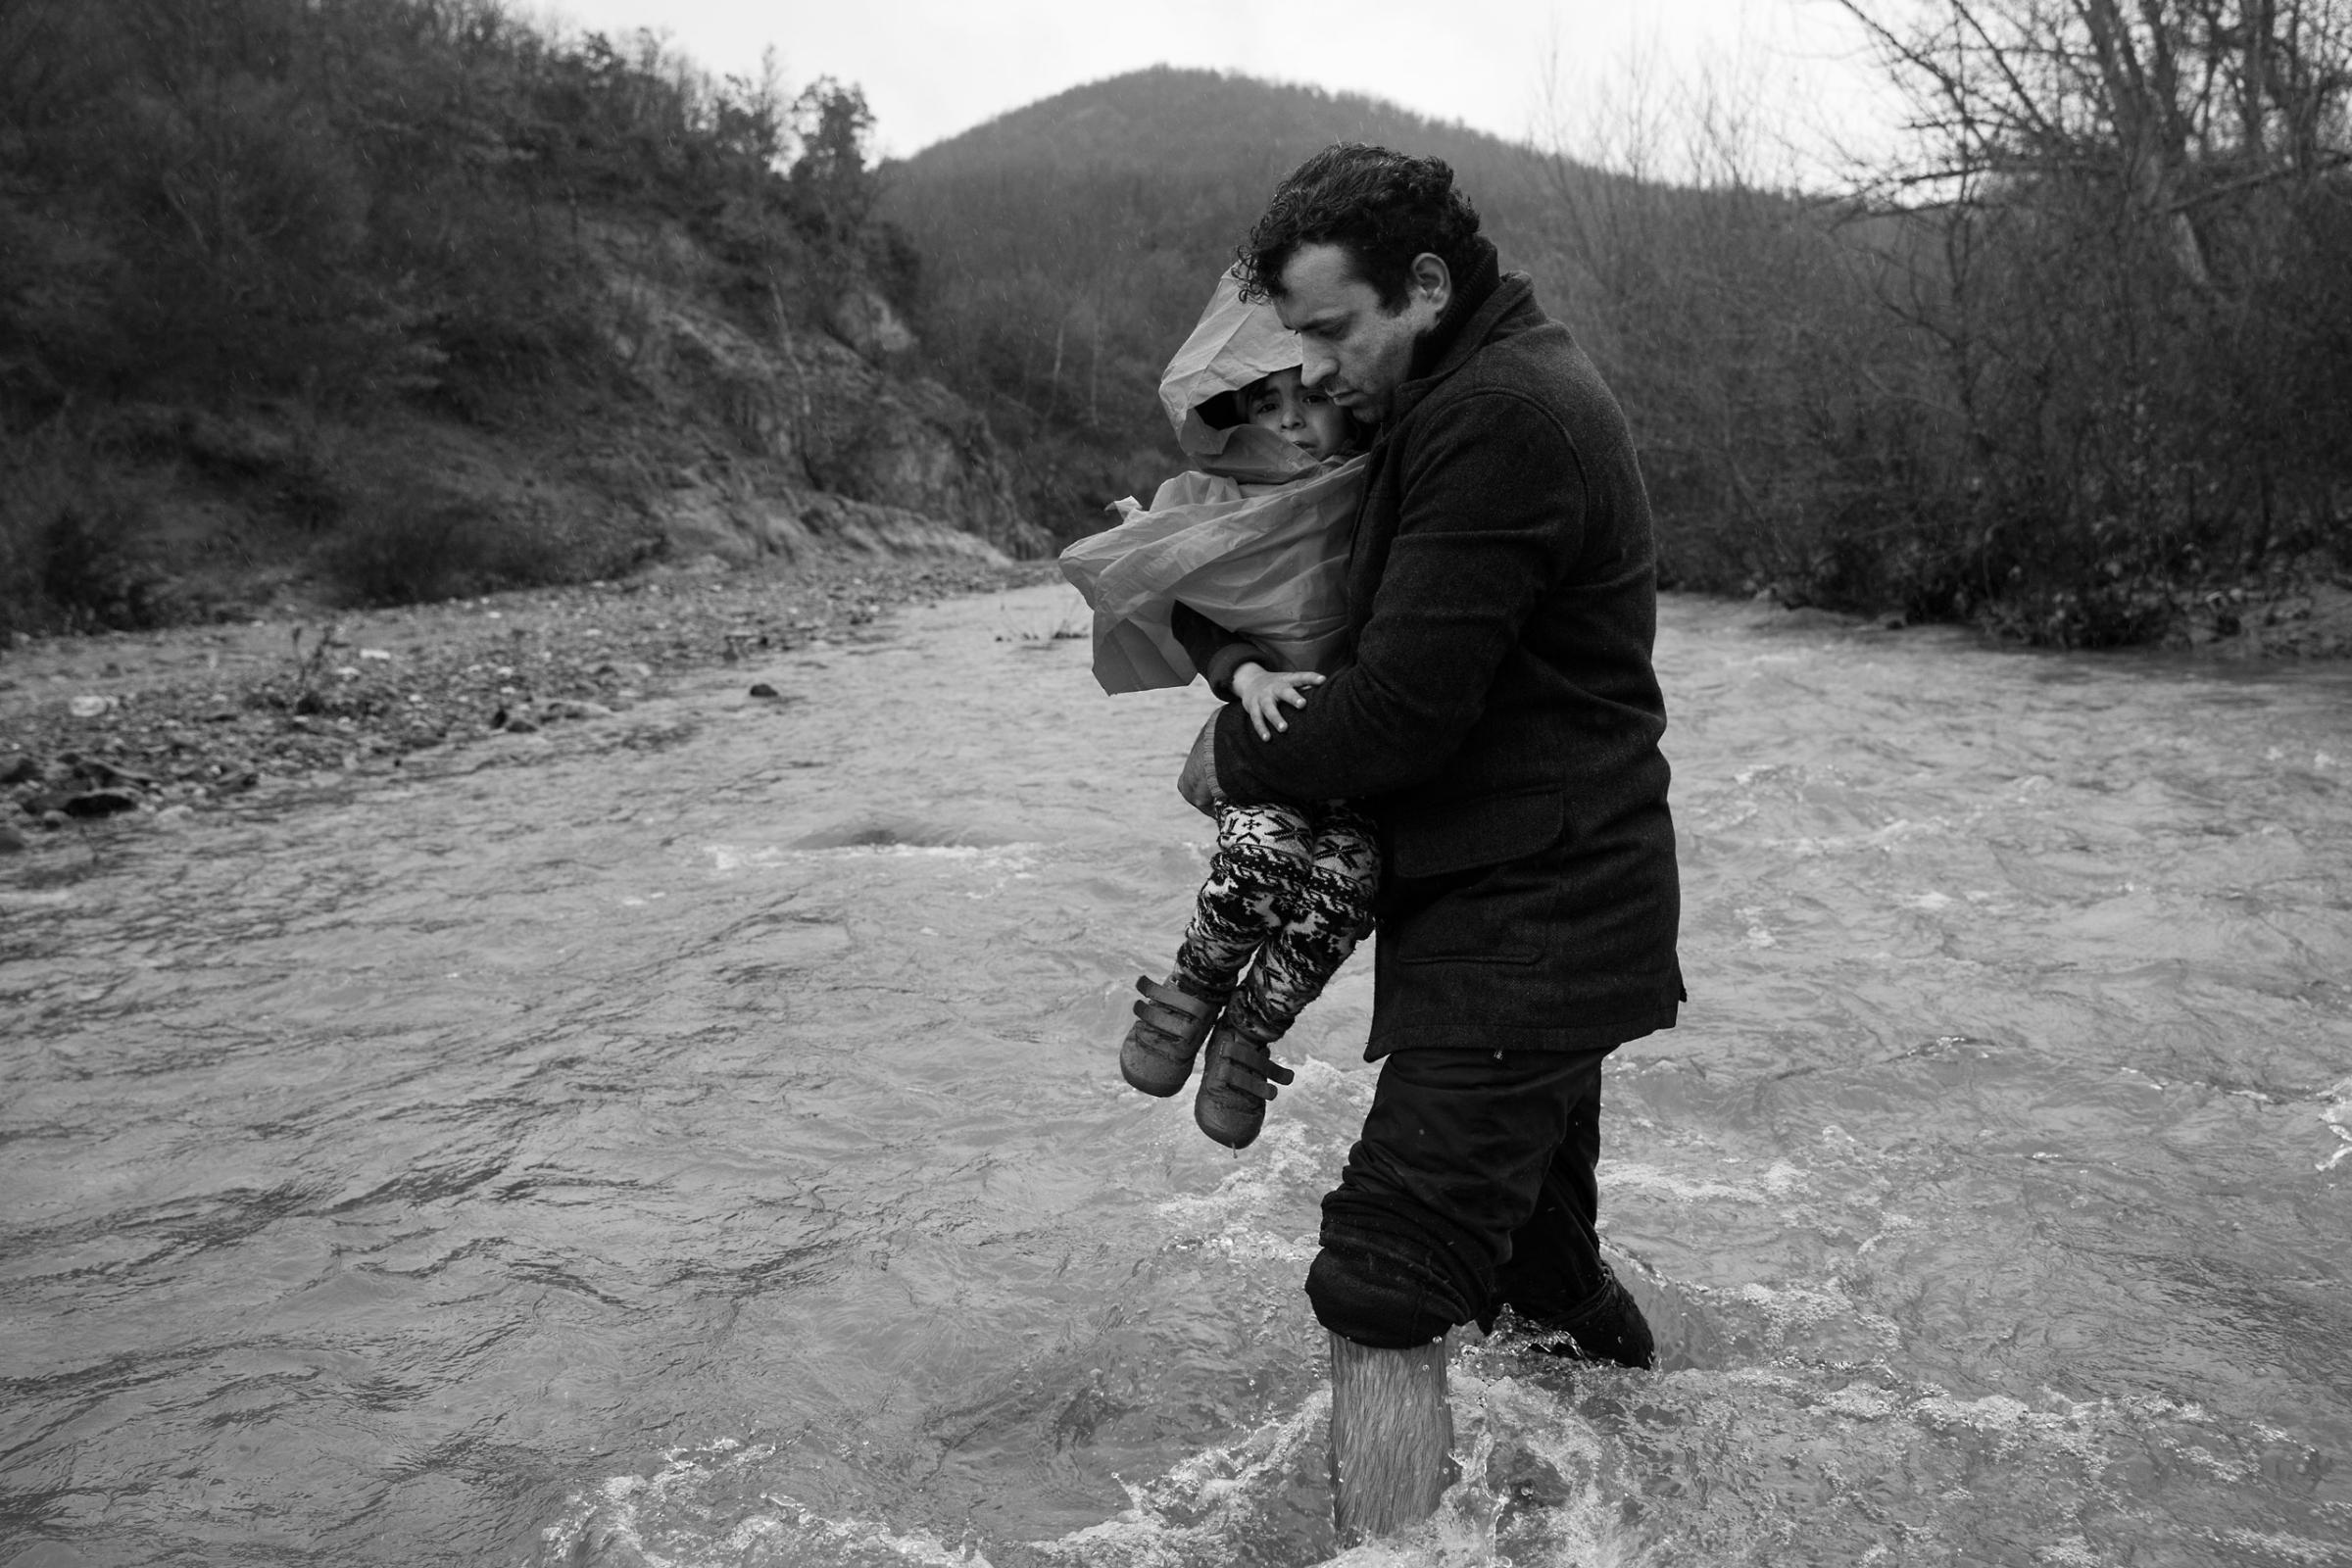 A man carries his child across a river into Macedonia on March 15, 2016 Scores of refugees, including elderly, disabled, and families with children attempted to make the dangerous trek.